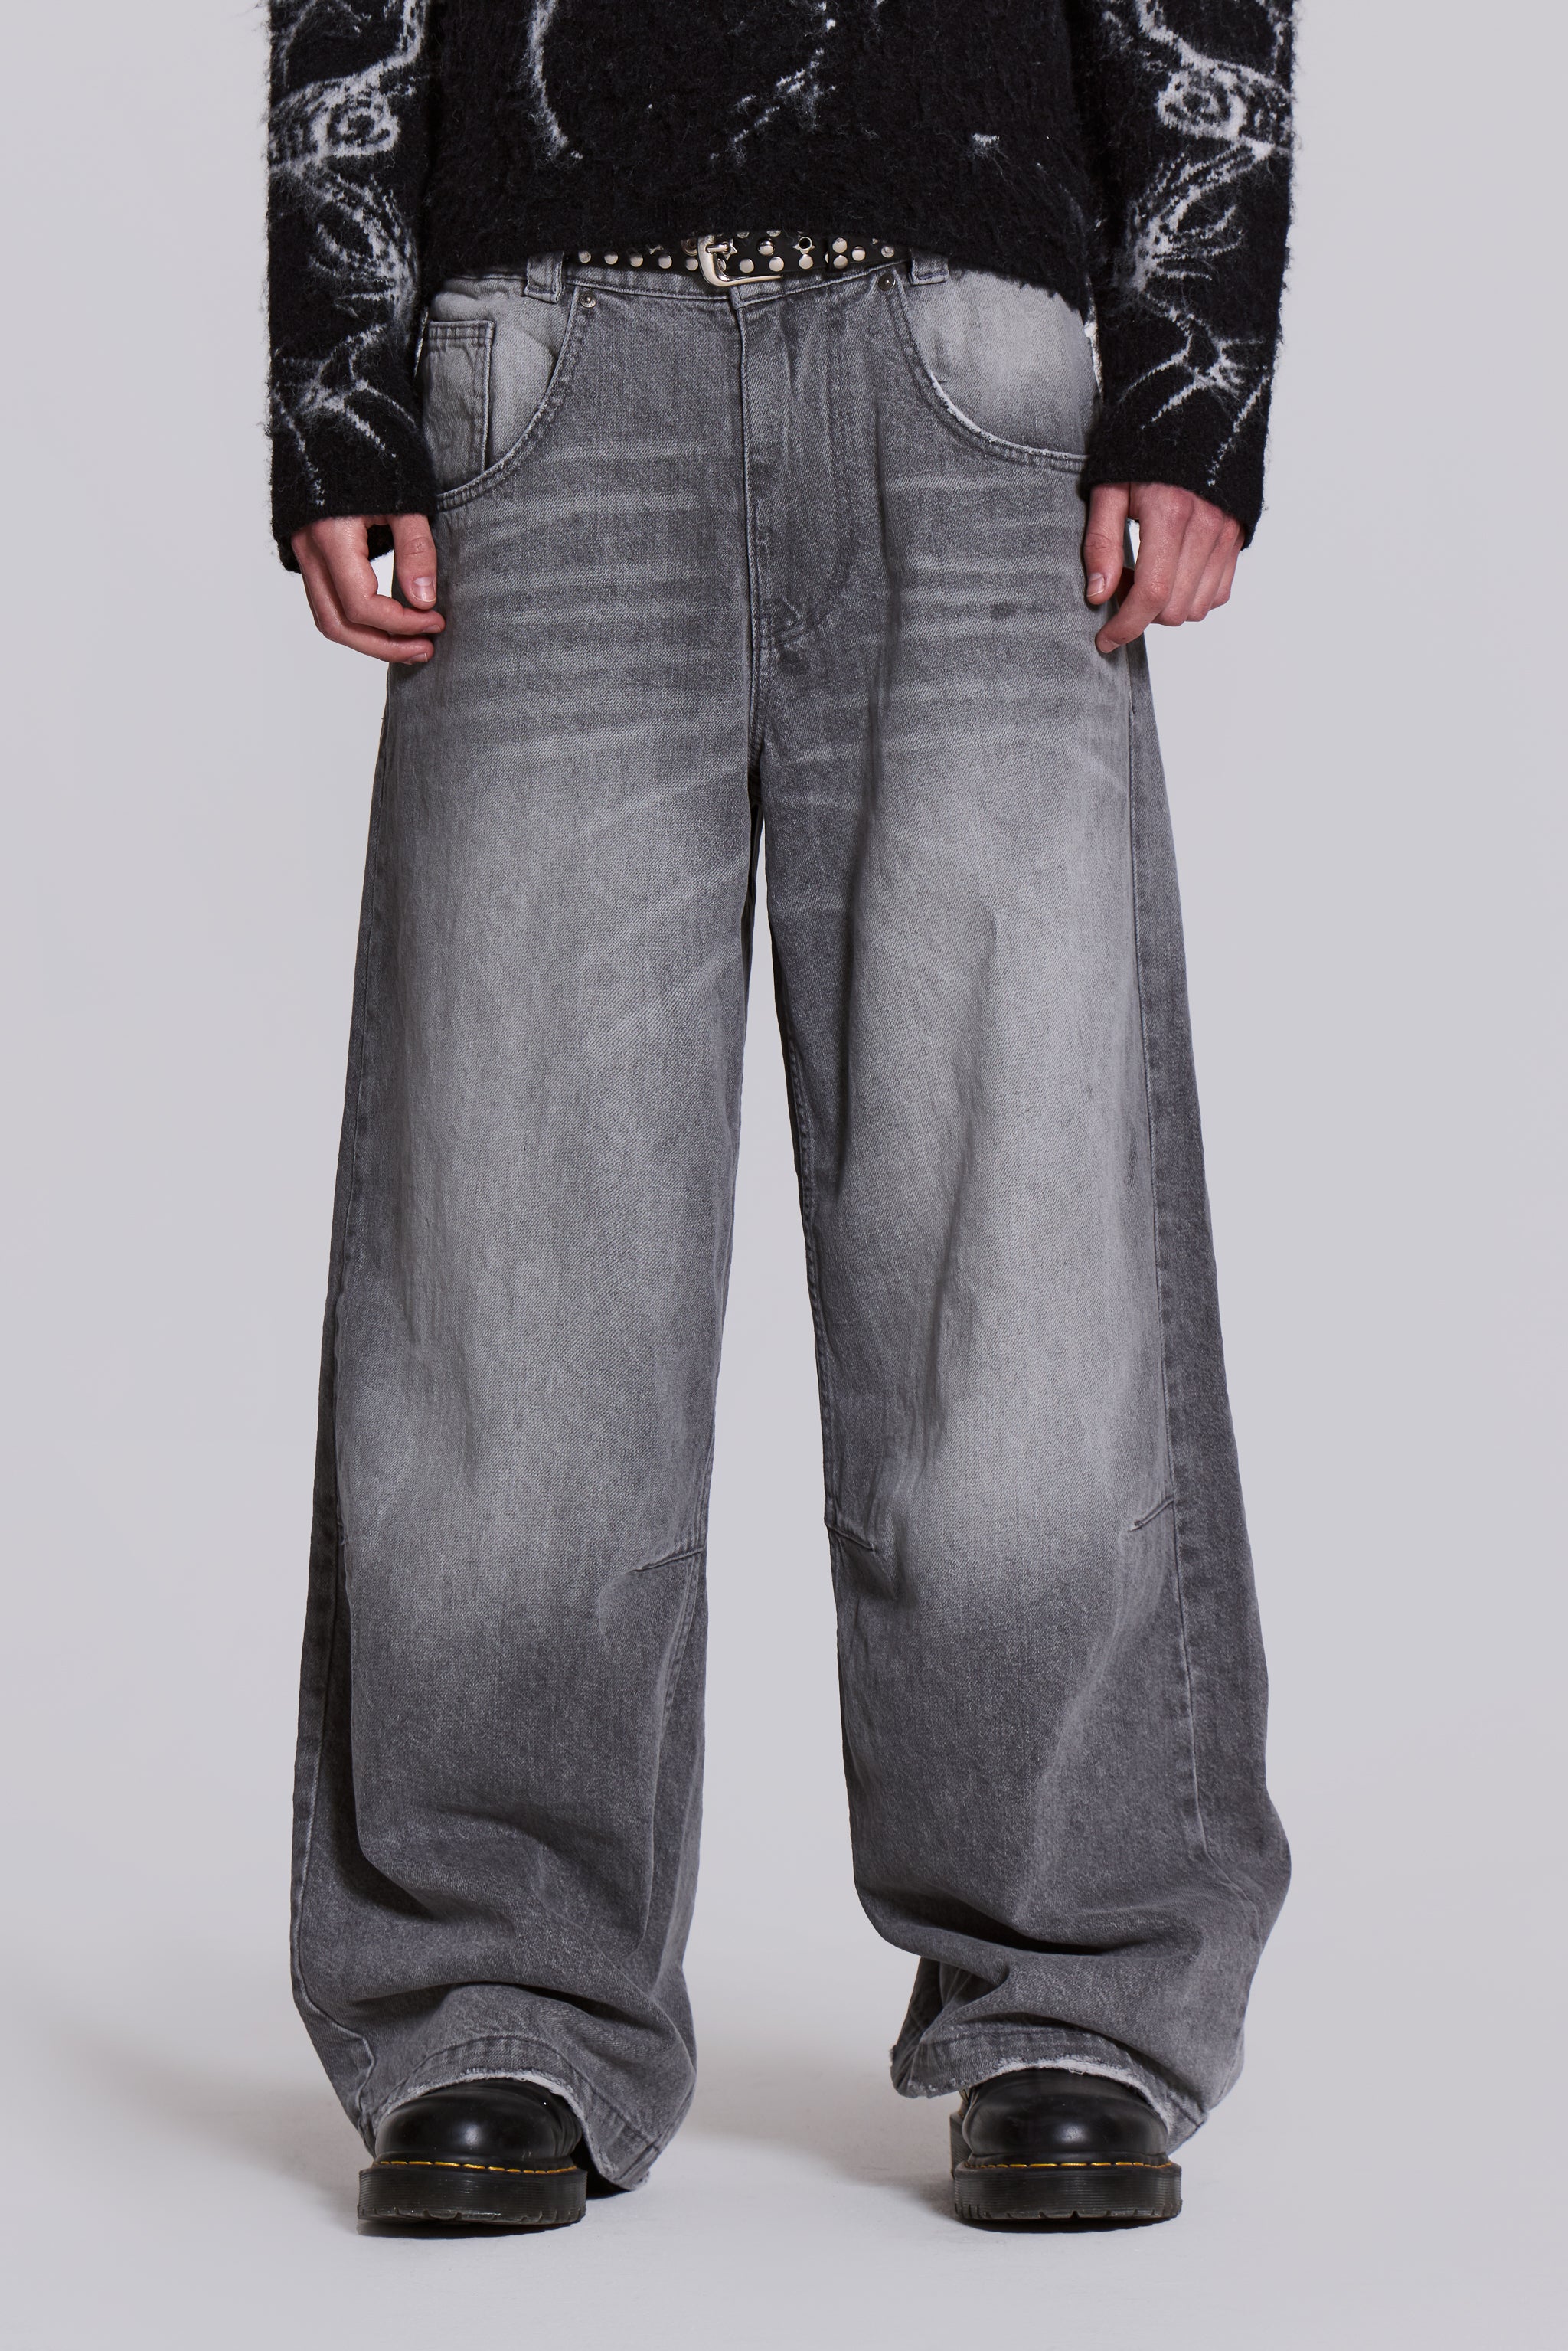 Jaded London Washed Grey Colossus Jeans